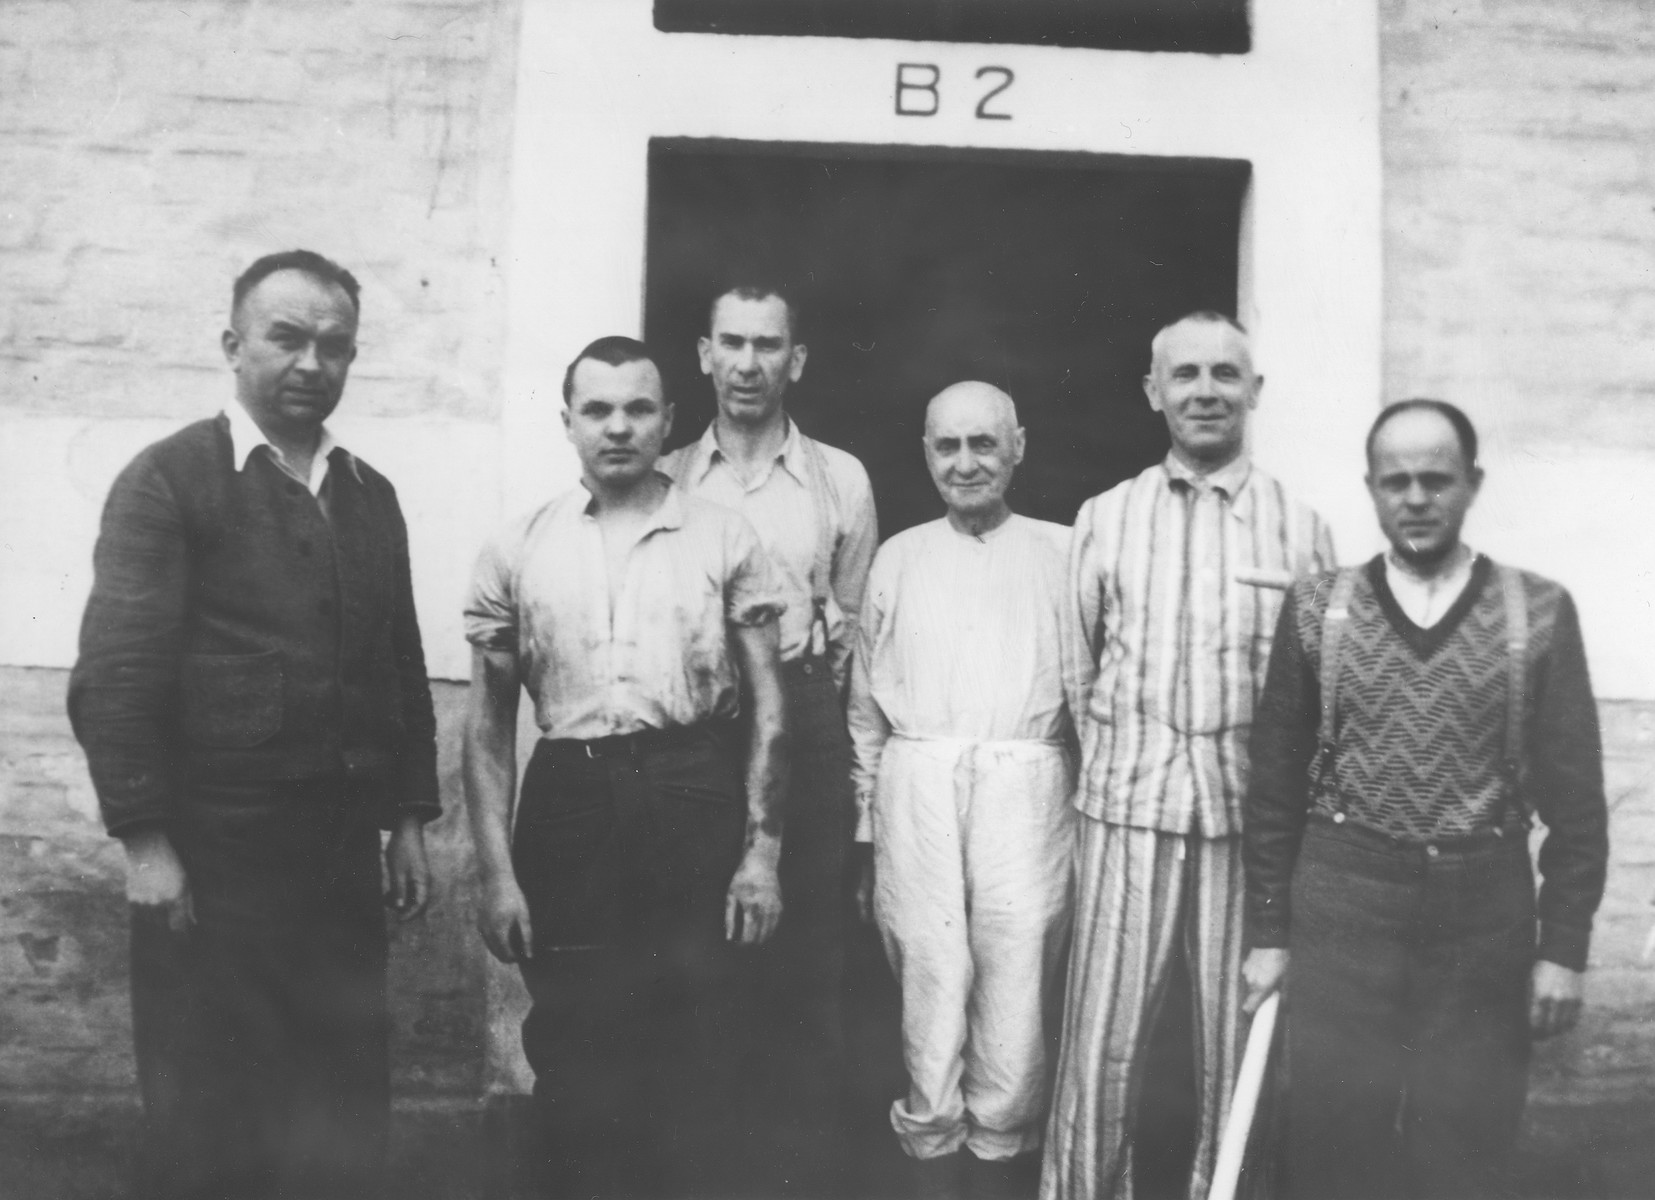 A group of Czech political prisoners stands in front of the infirmary in Theresienstadt.

Pictured from left to right are Dr. Vratil, Oskar Bartolsic, Captain Benak, unknown, Colonel Stribrny, and Sgt. Stovicek.